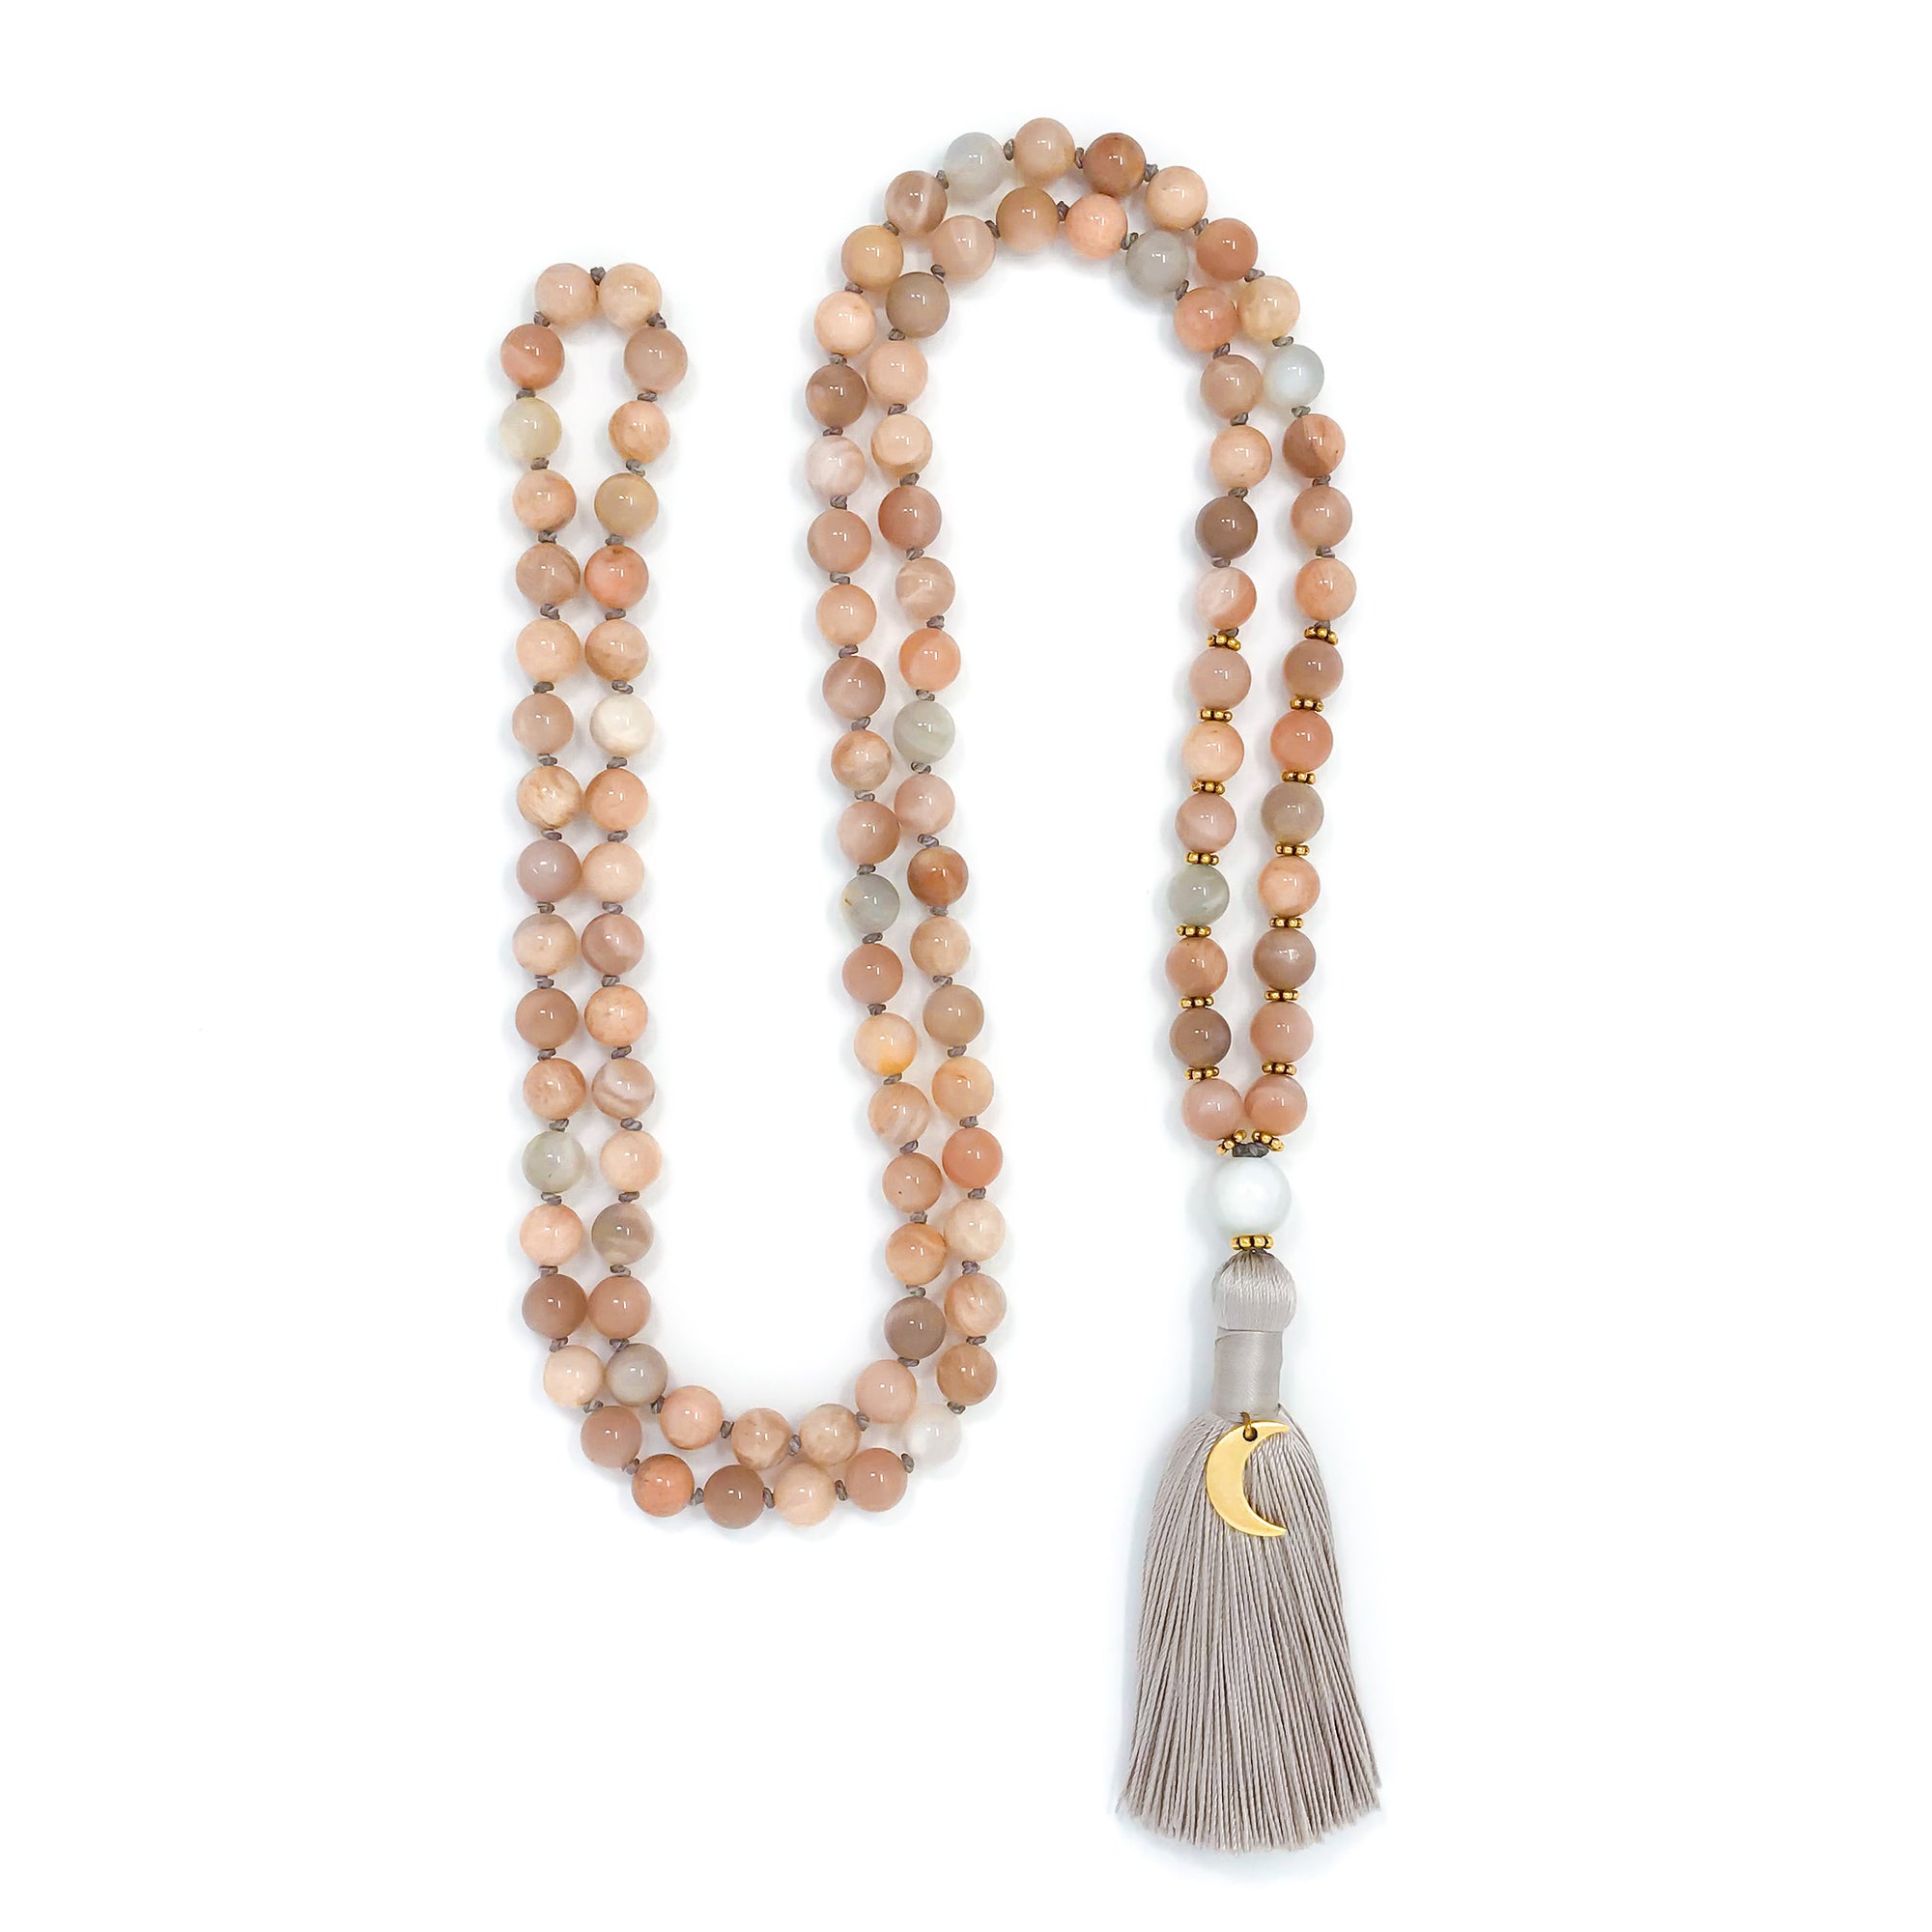 sunstone mala necklace knotted on gray silk with white moonstone guru bead, gray tassel and gold moon crescent charm